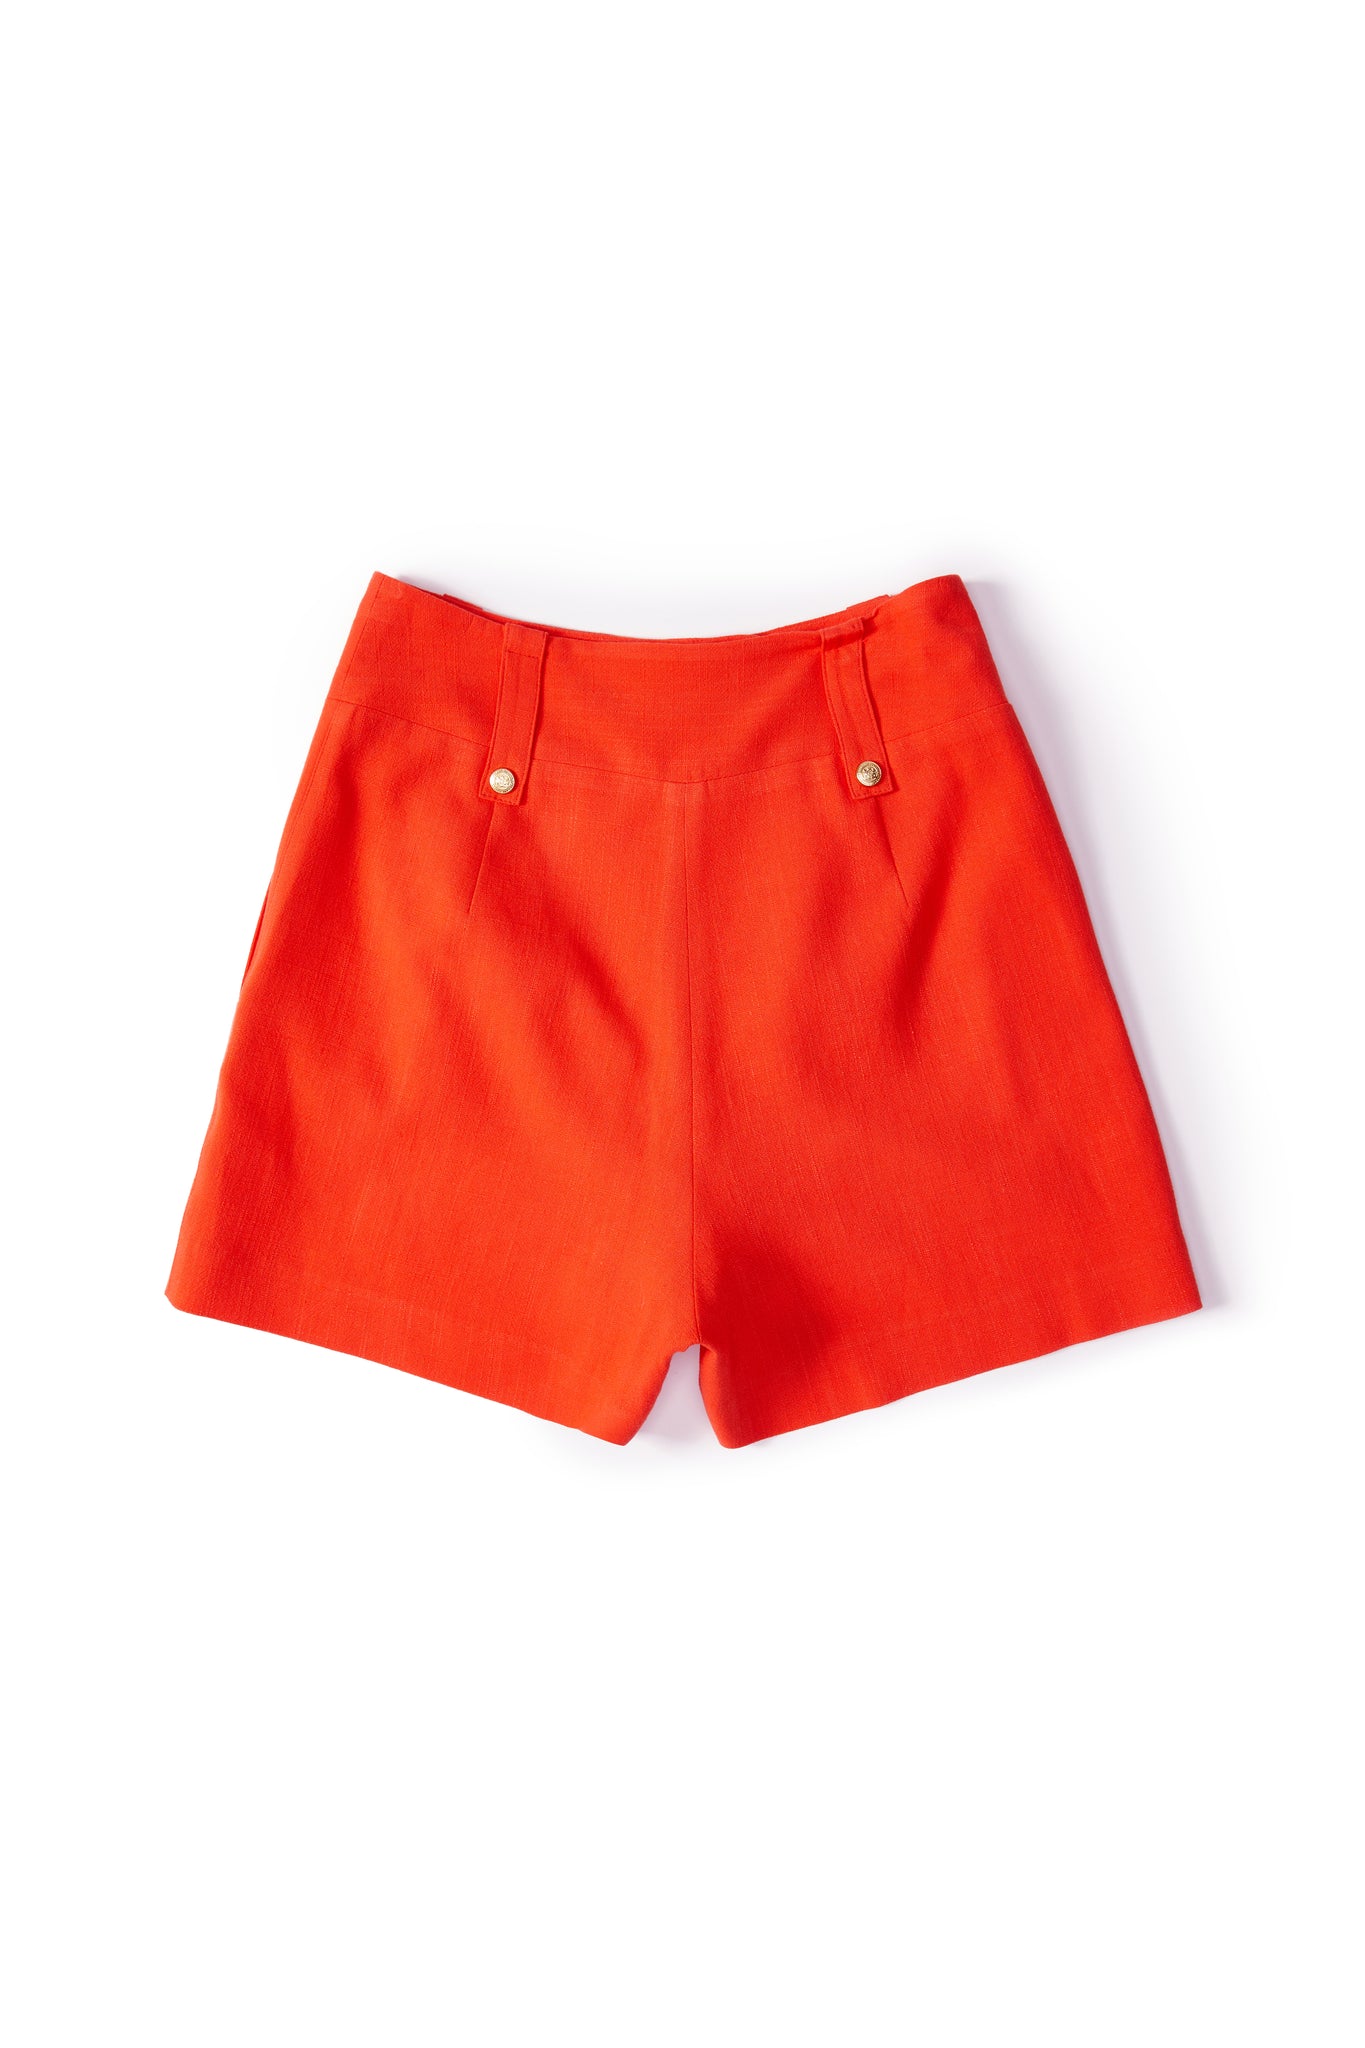 back of womens orange linen tailored shorts with two single knife pleats and centre front zip fly fastening with two gold stud buttons